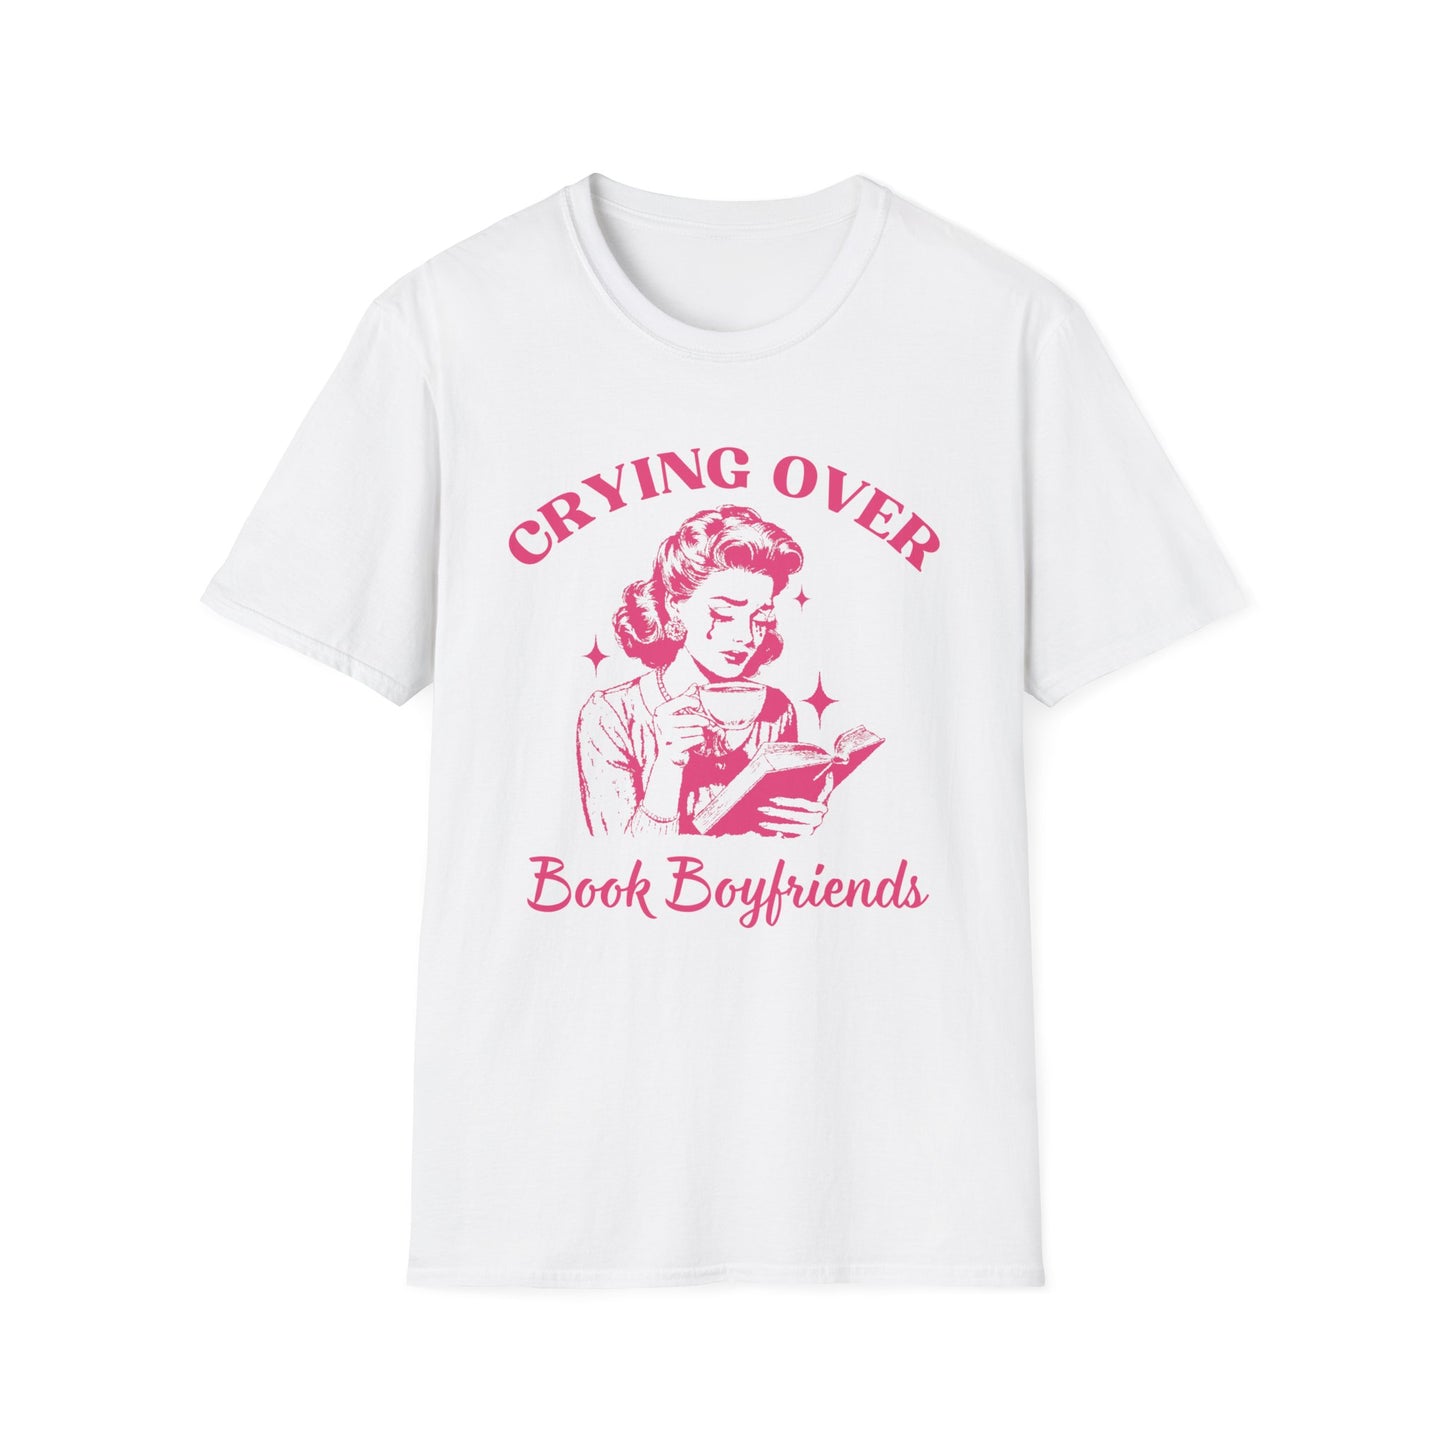 Crying Over Book Boyfriends, Vintage Housewife Aesthetic, Retro Woman Reading Book, Book Lovers Gift, Plus Size, Unisex Softstyle T-Shirt